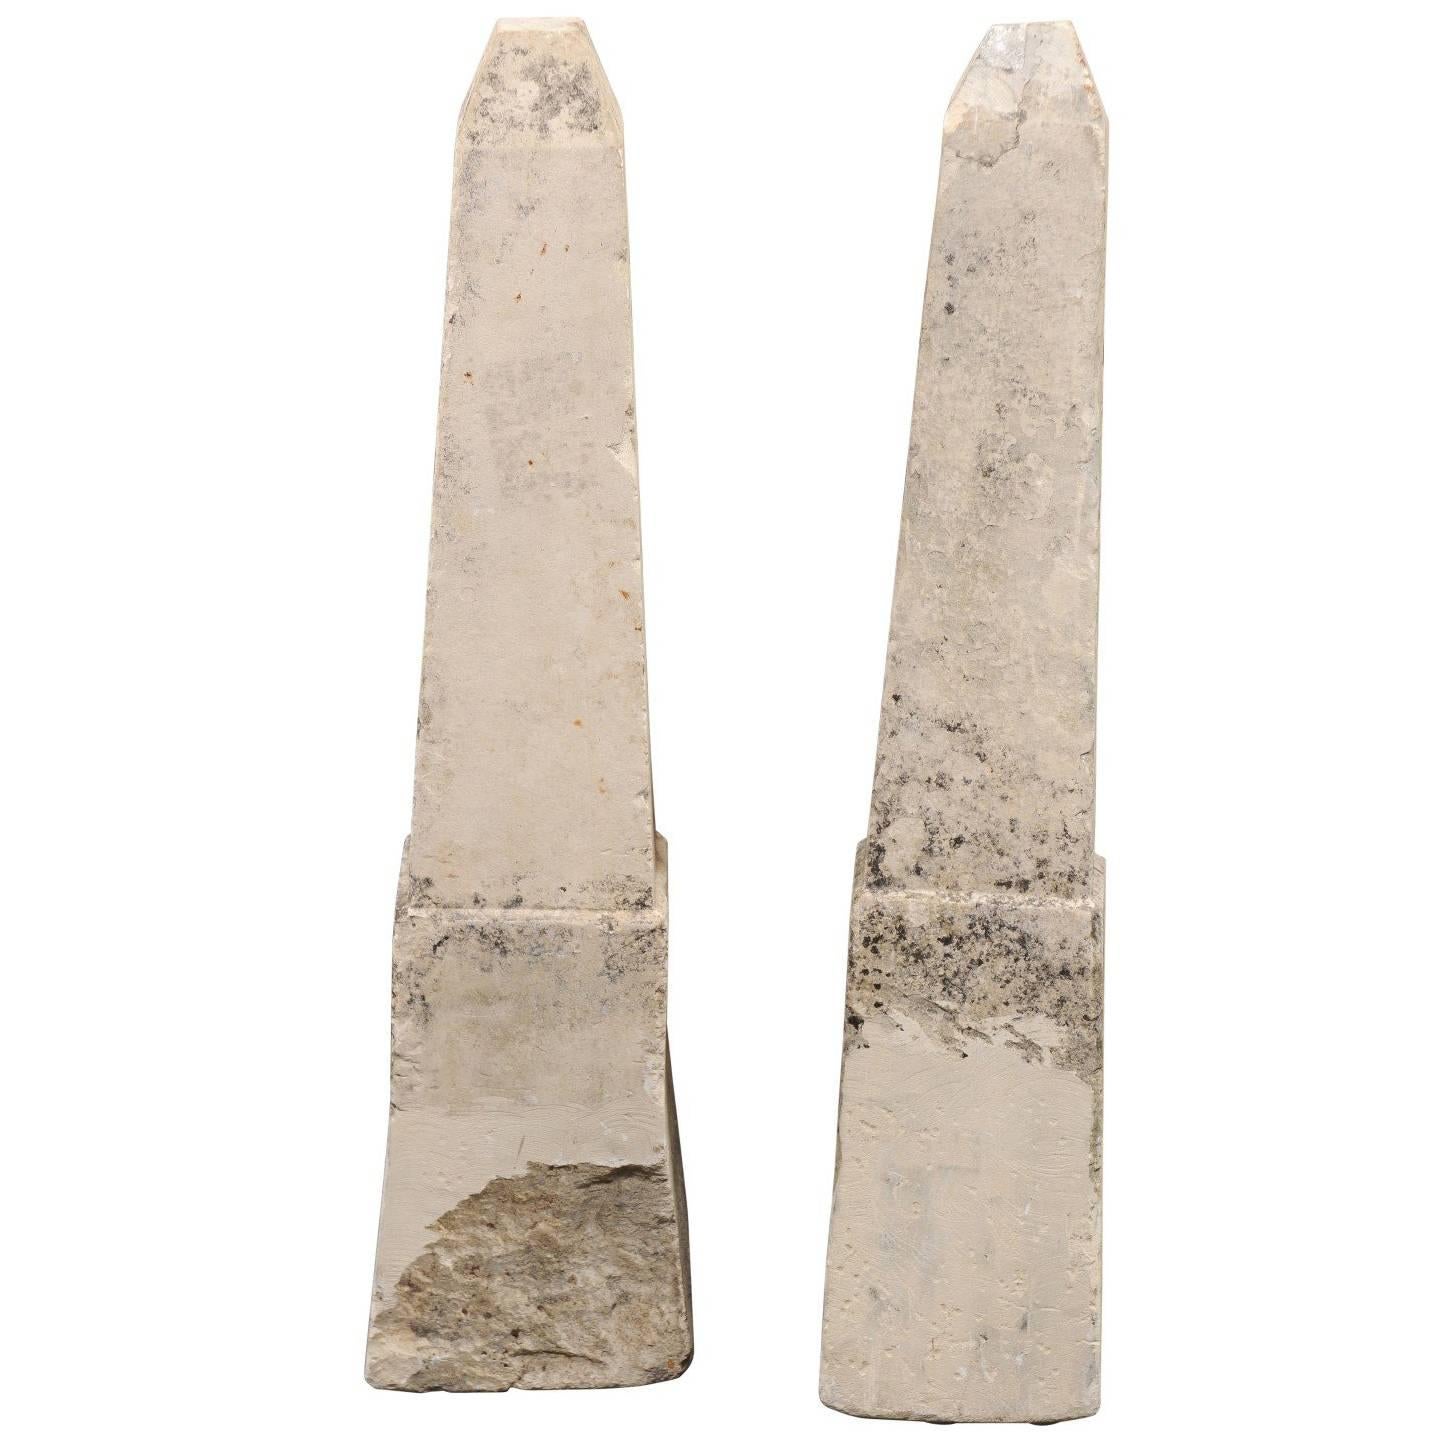 Pair of 19th Century French Stone Obelisk Property Markers, Perhaps for Garden